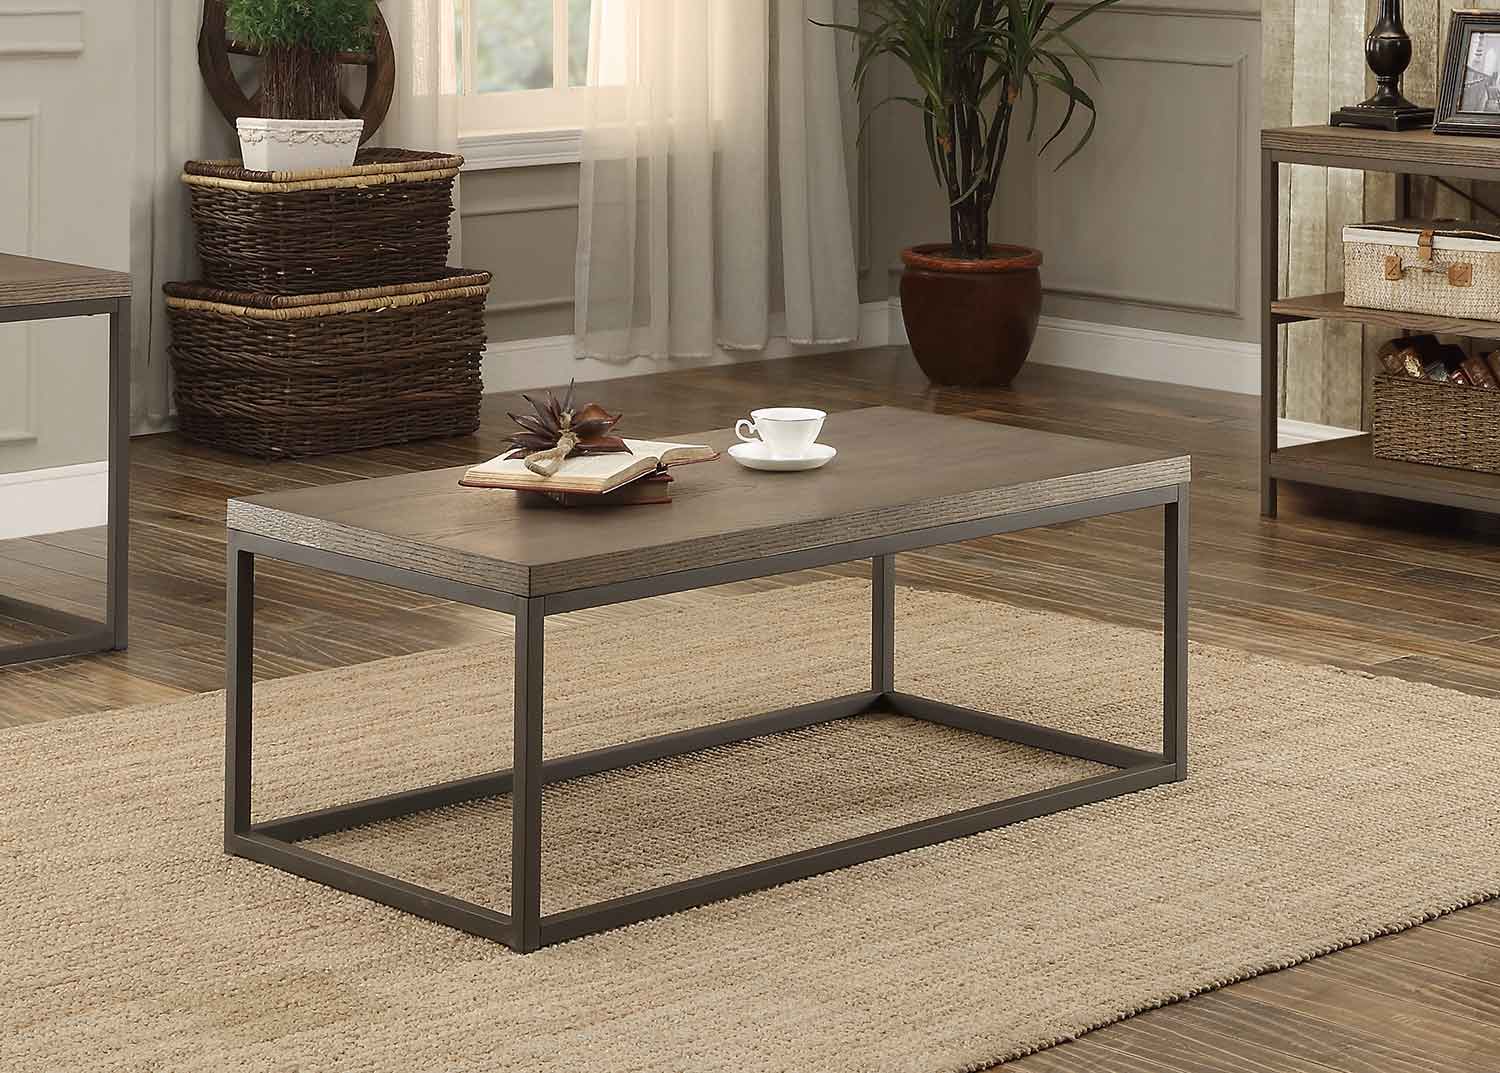 Homelegance Daria Cocktail/Coffee Table - Weathered Wood Table Top with Metal Framing